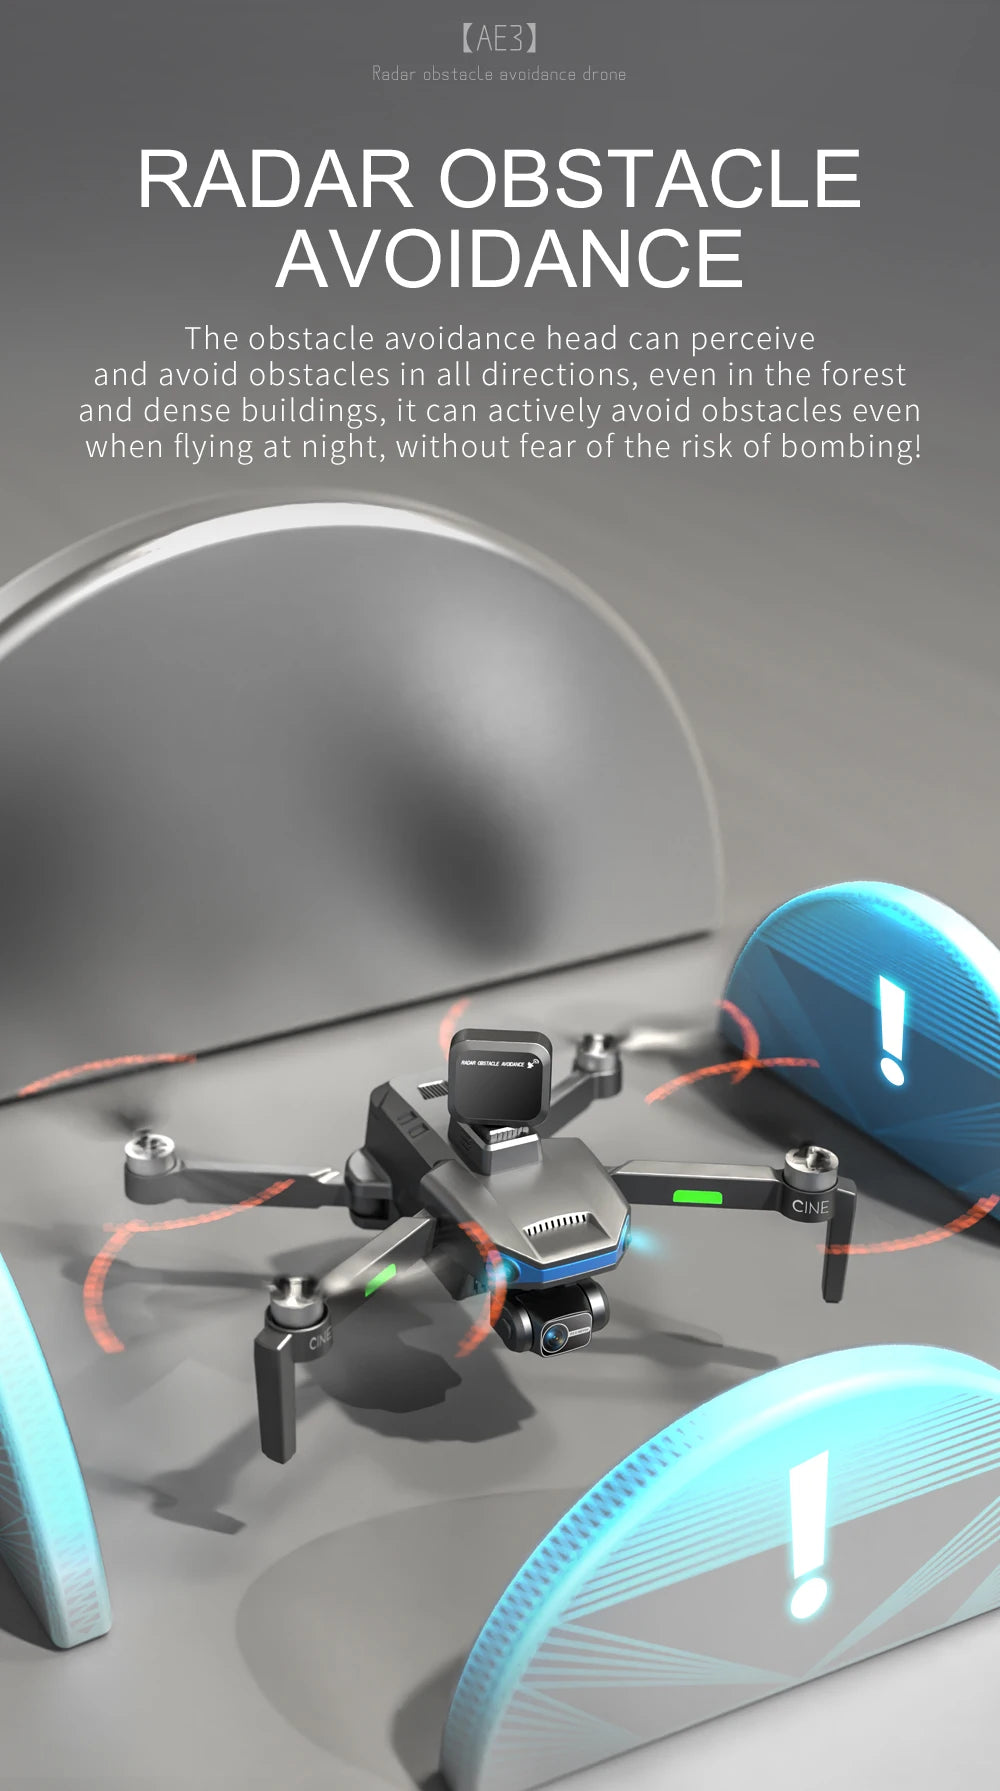 AE3 / AE3 PRO Max GPS Drone, RADAR OBSTACLE AVOIDANCE can actively avoid